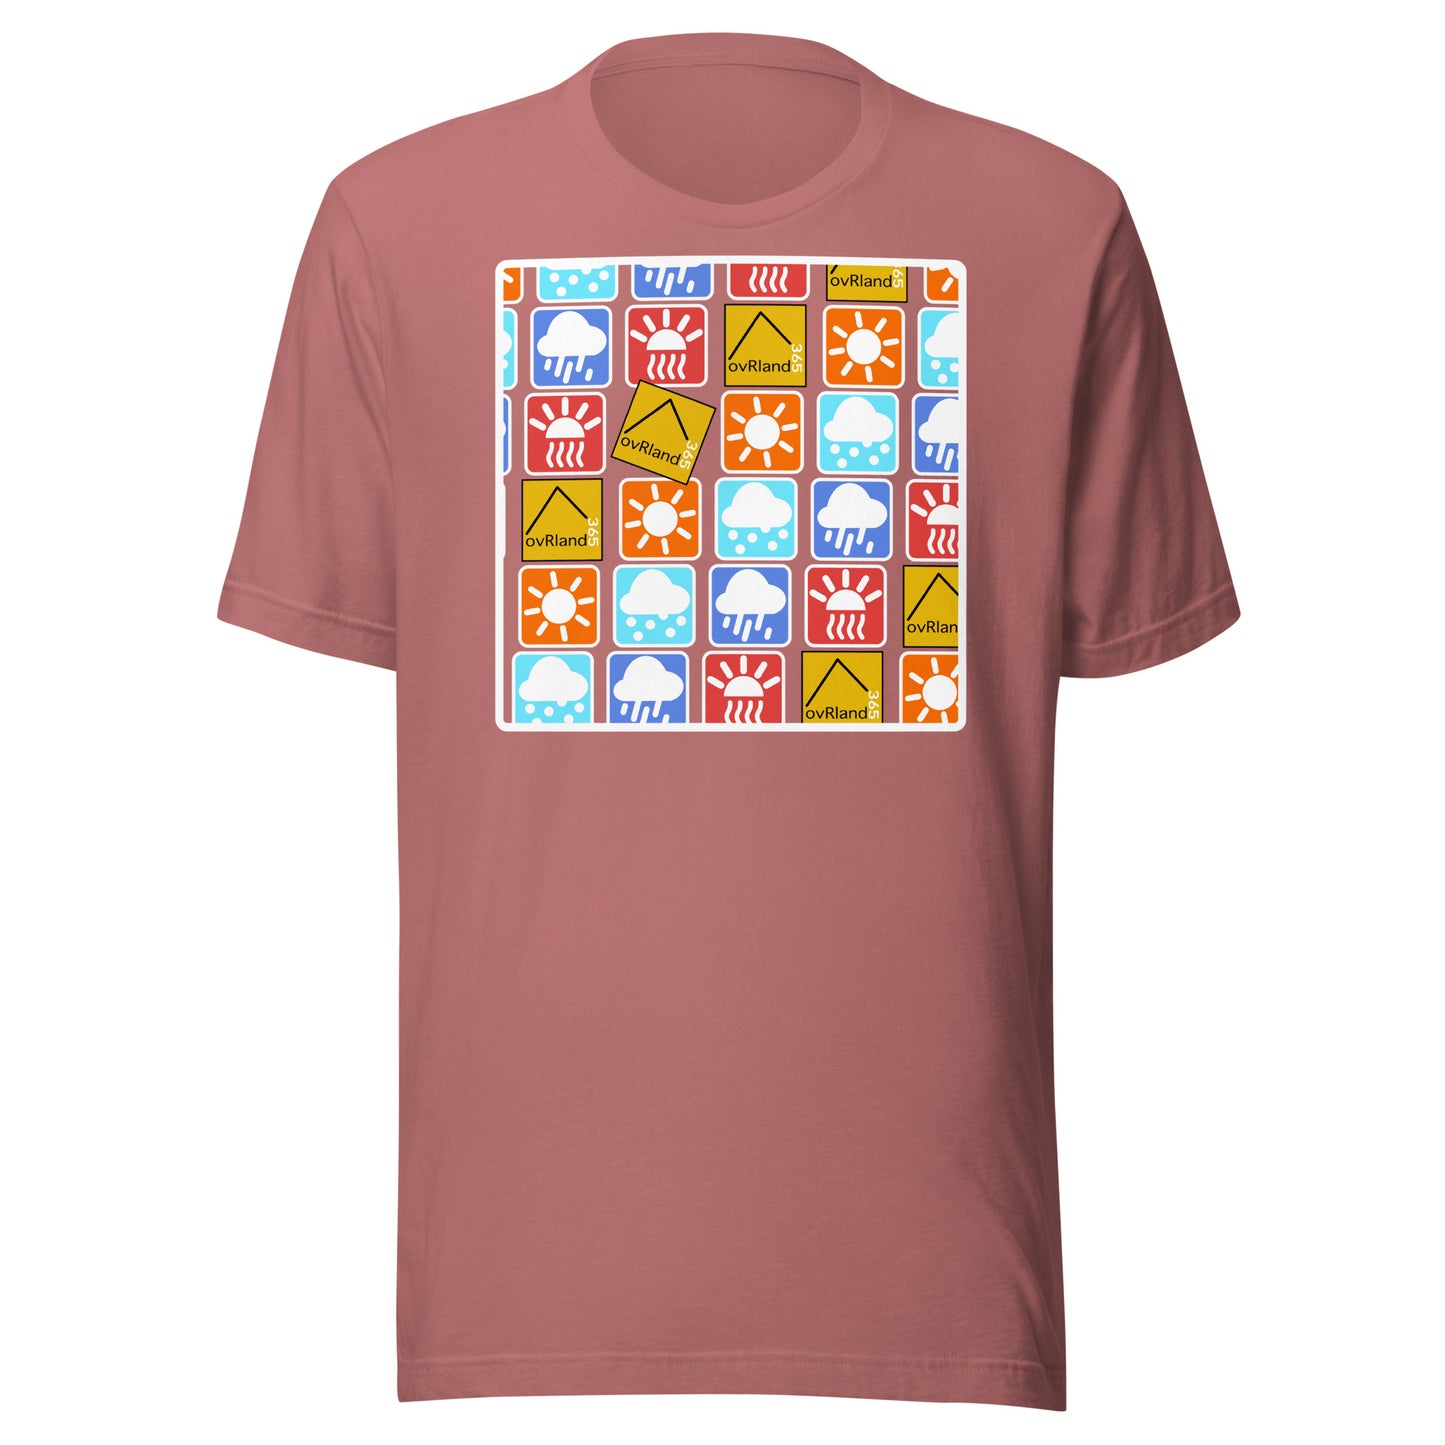 Overland 365 - Weather Icons. Pink T-shirt. overland365.com